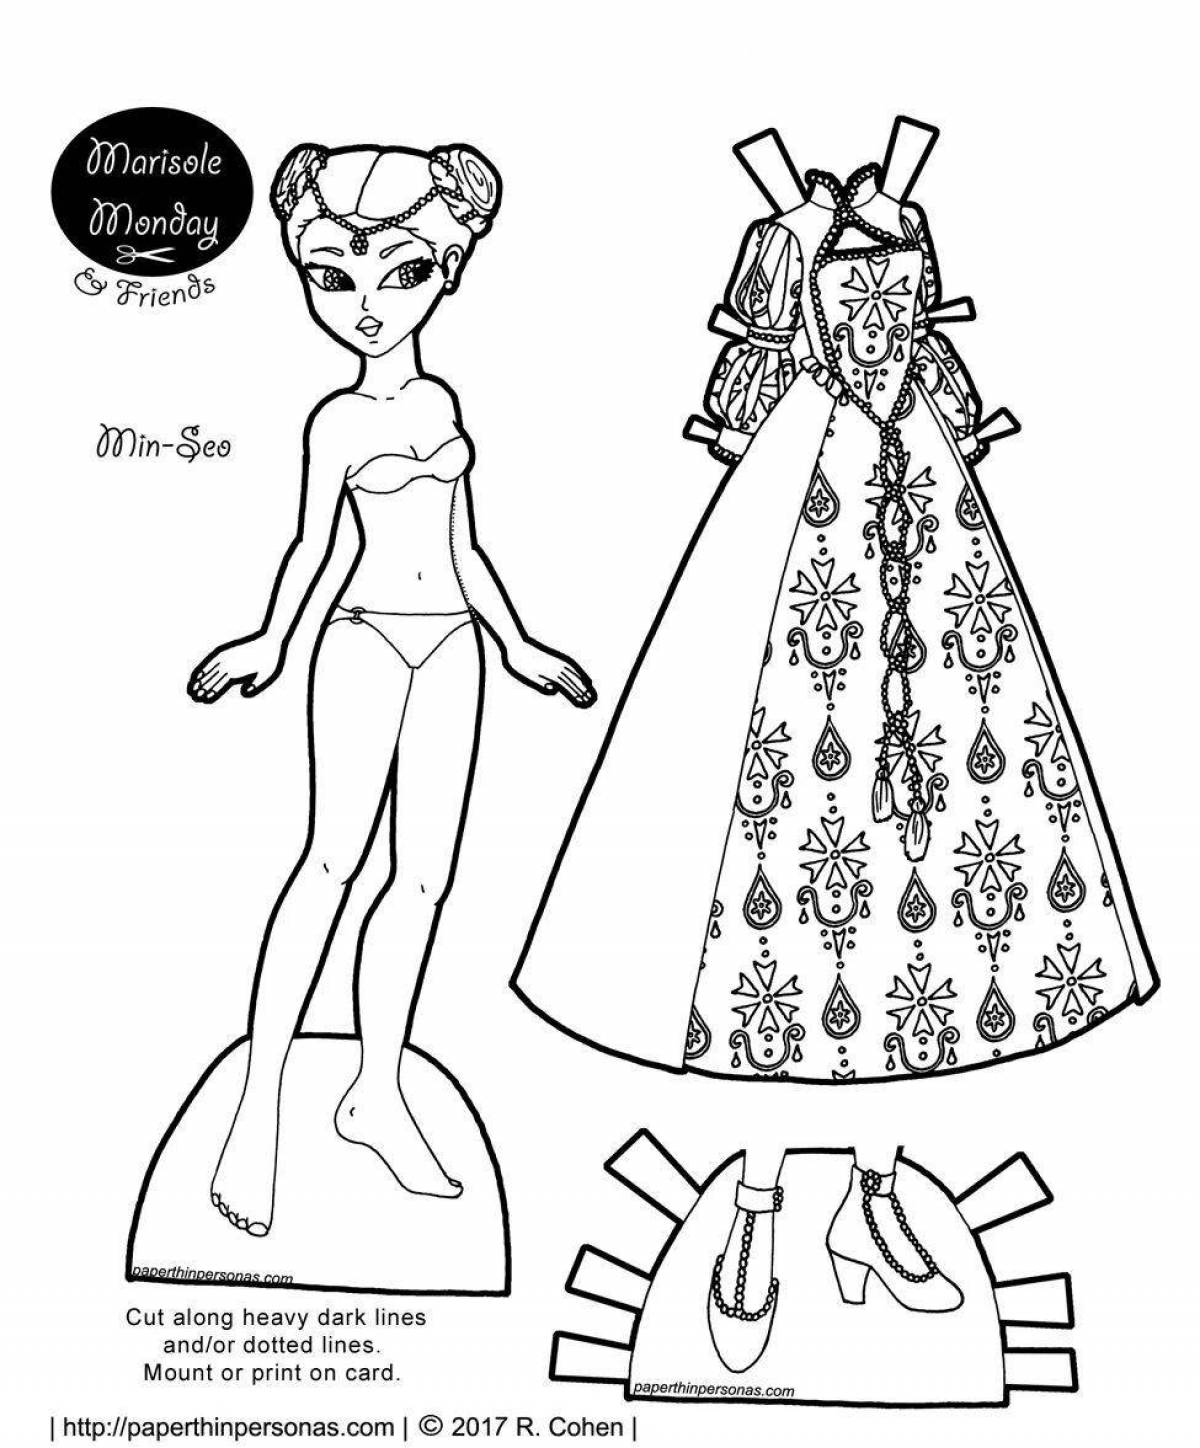 Shiny paper doll with clothes